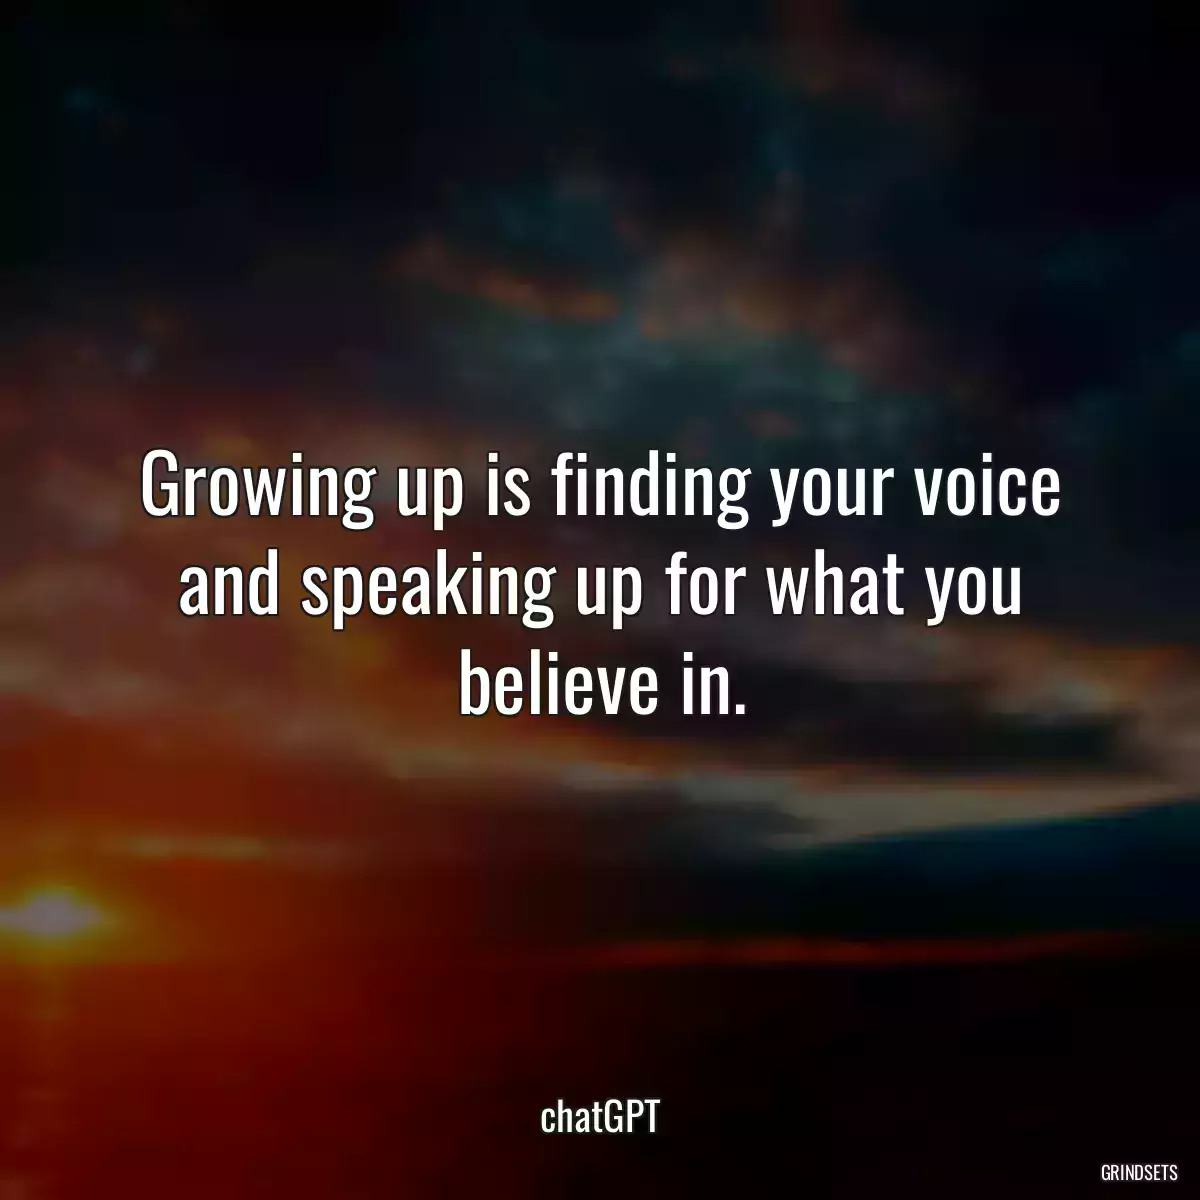 Growing up is finding your voice and speaking up for what you believe in.